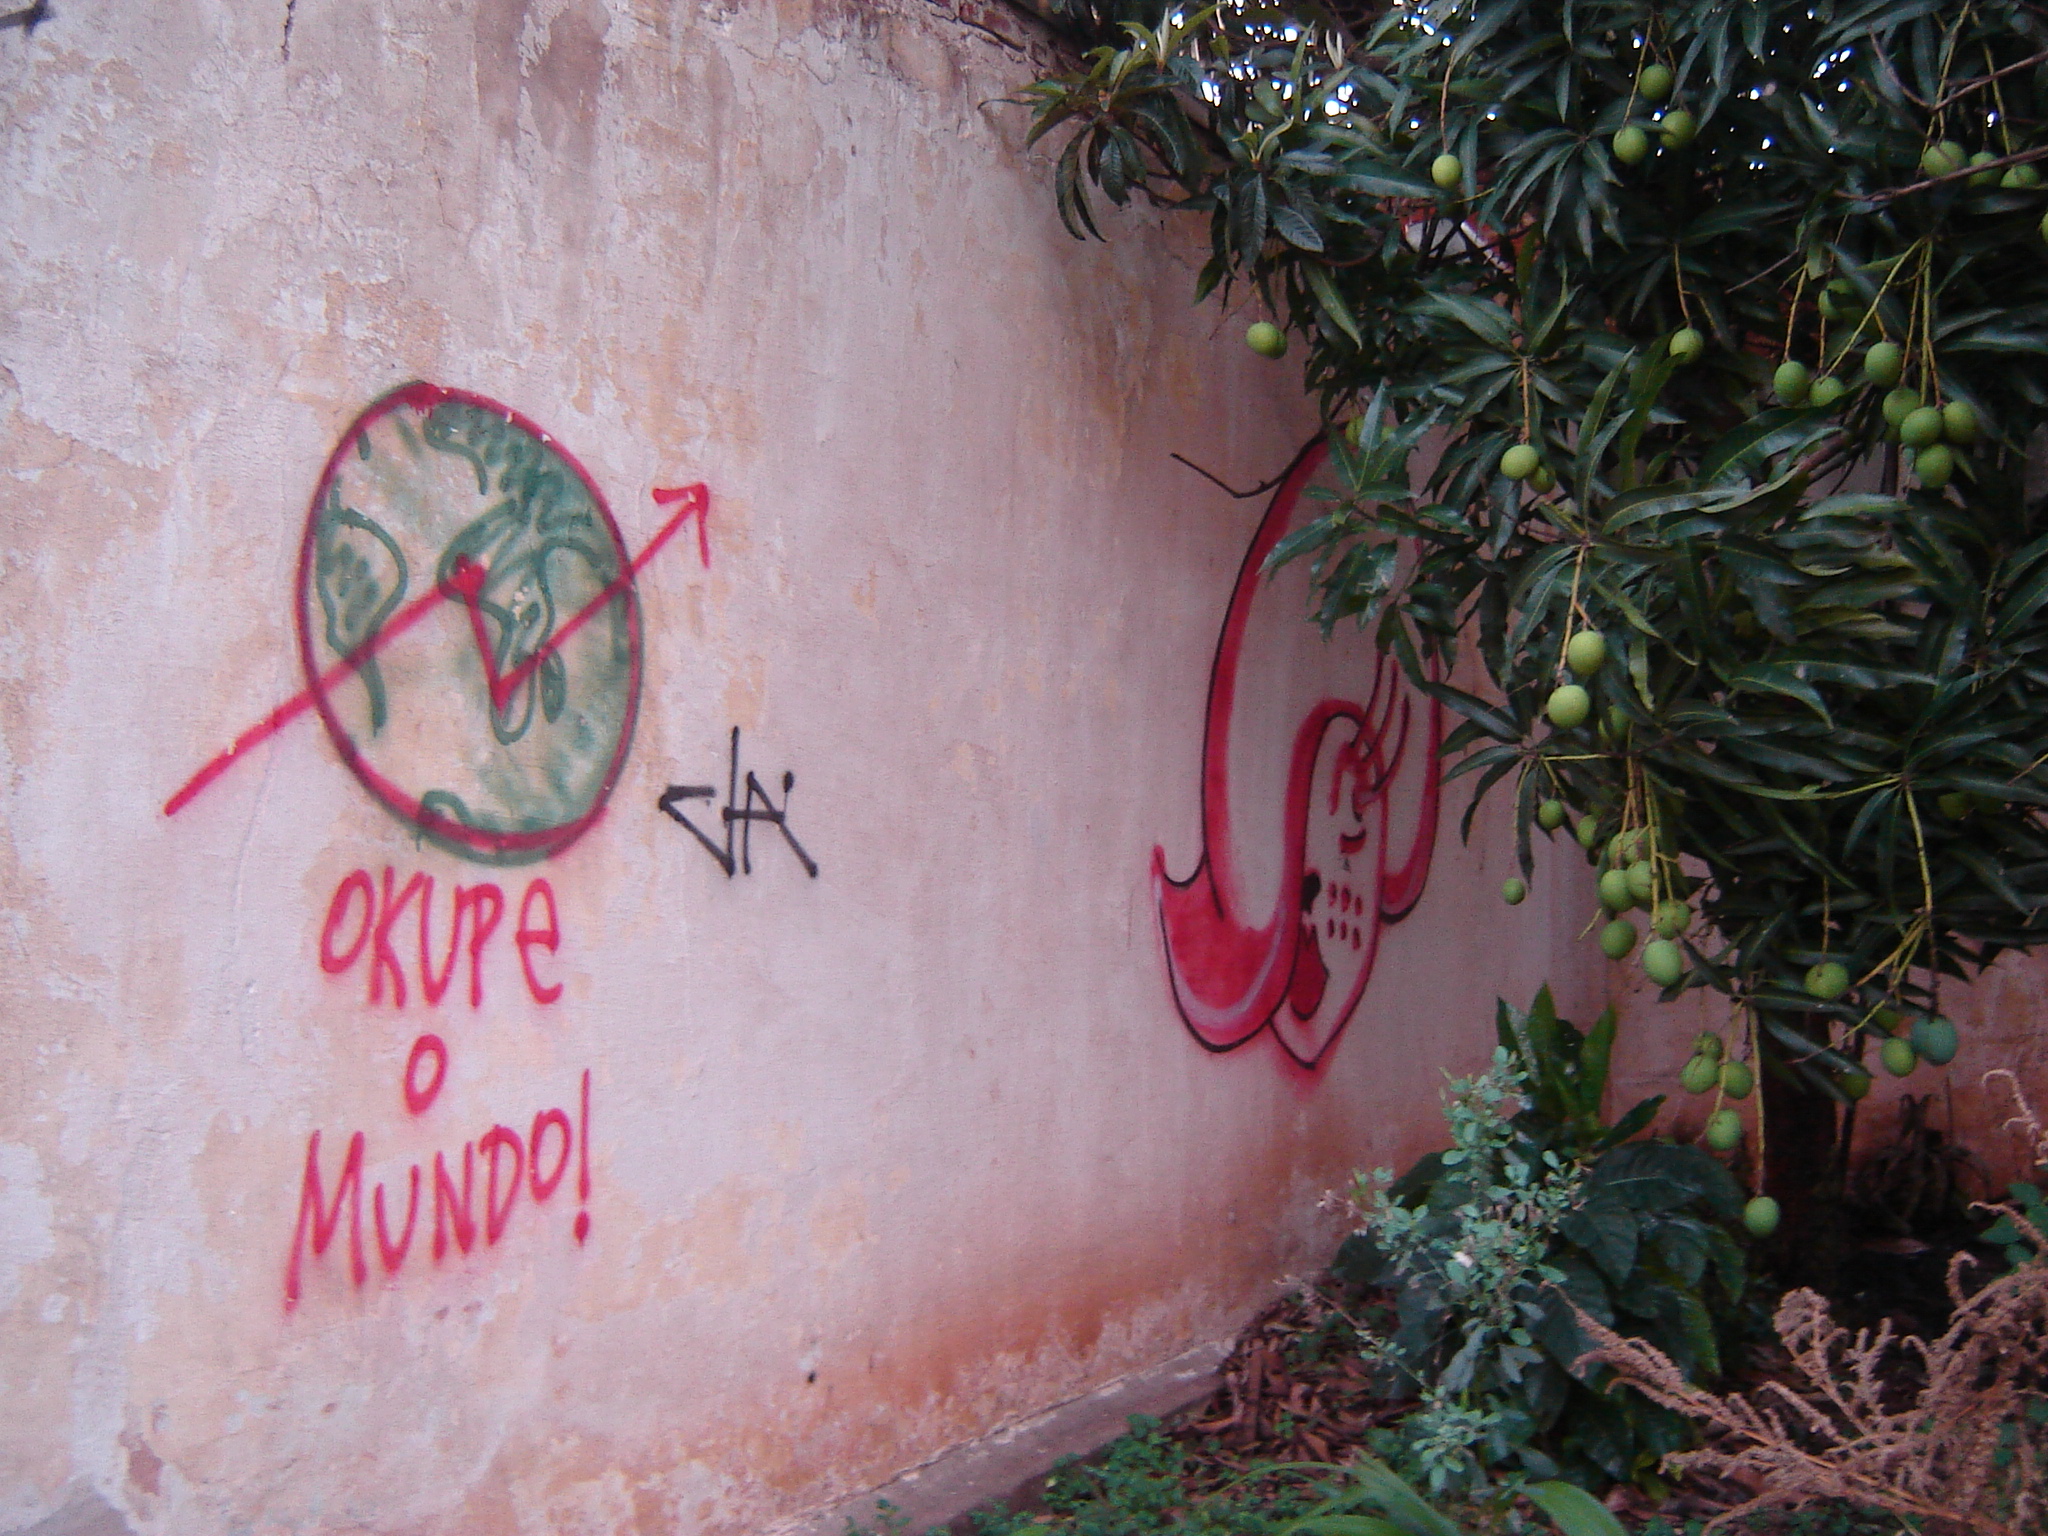 graffiti on a wall and some trees